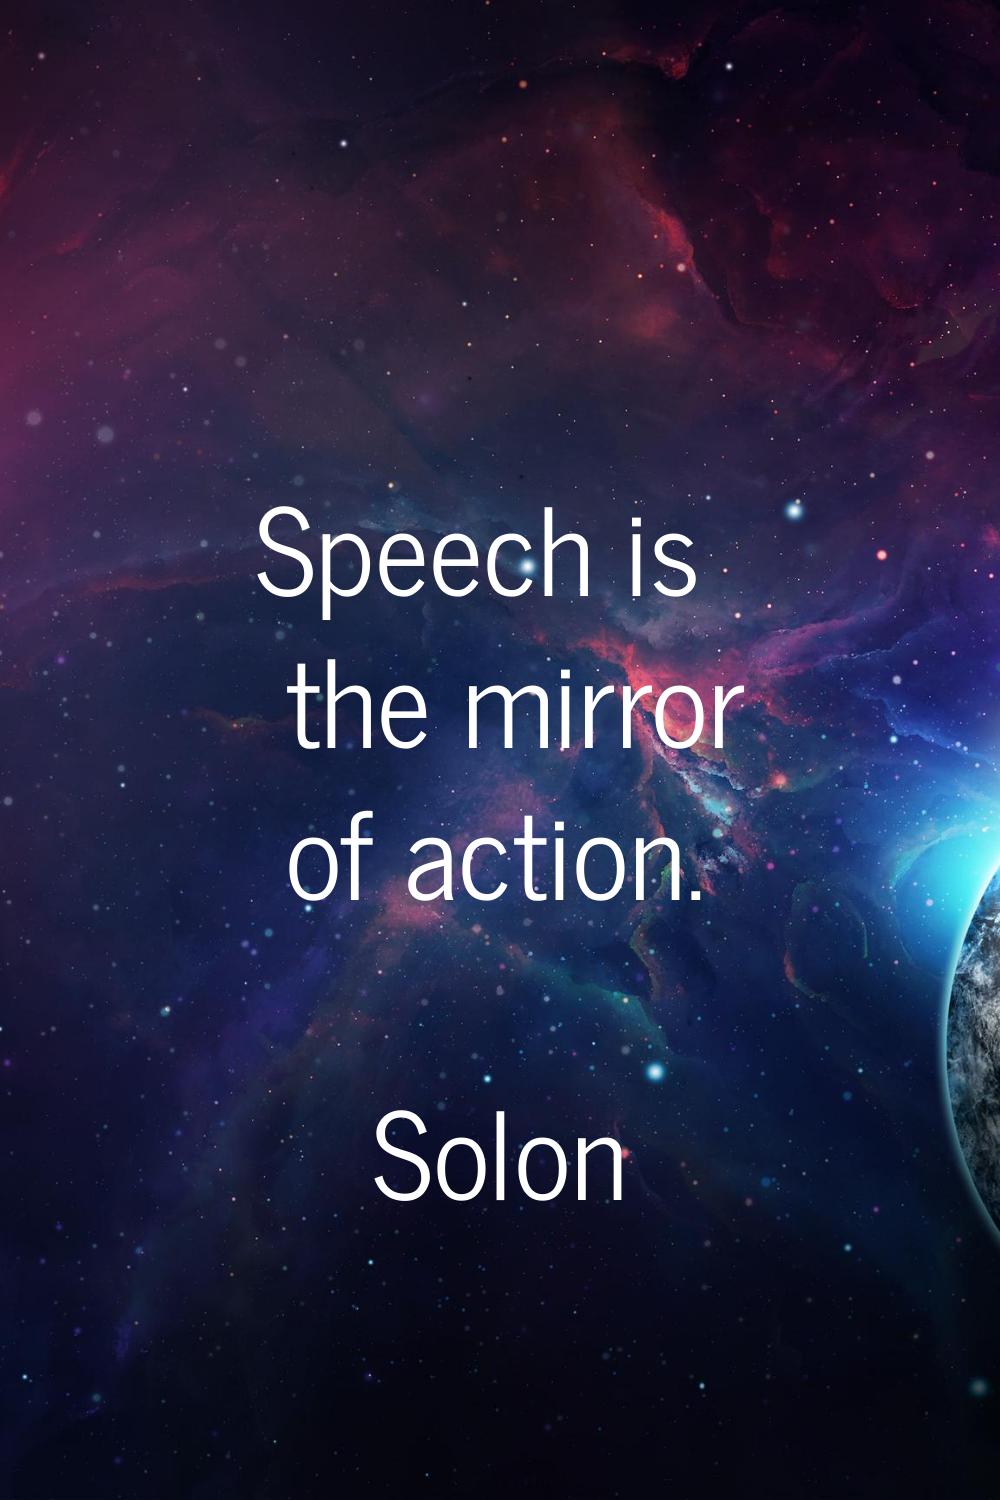 Speech is the mirror of action.